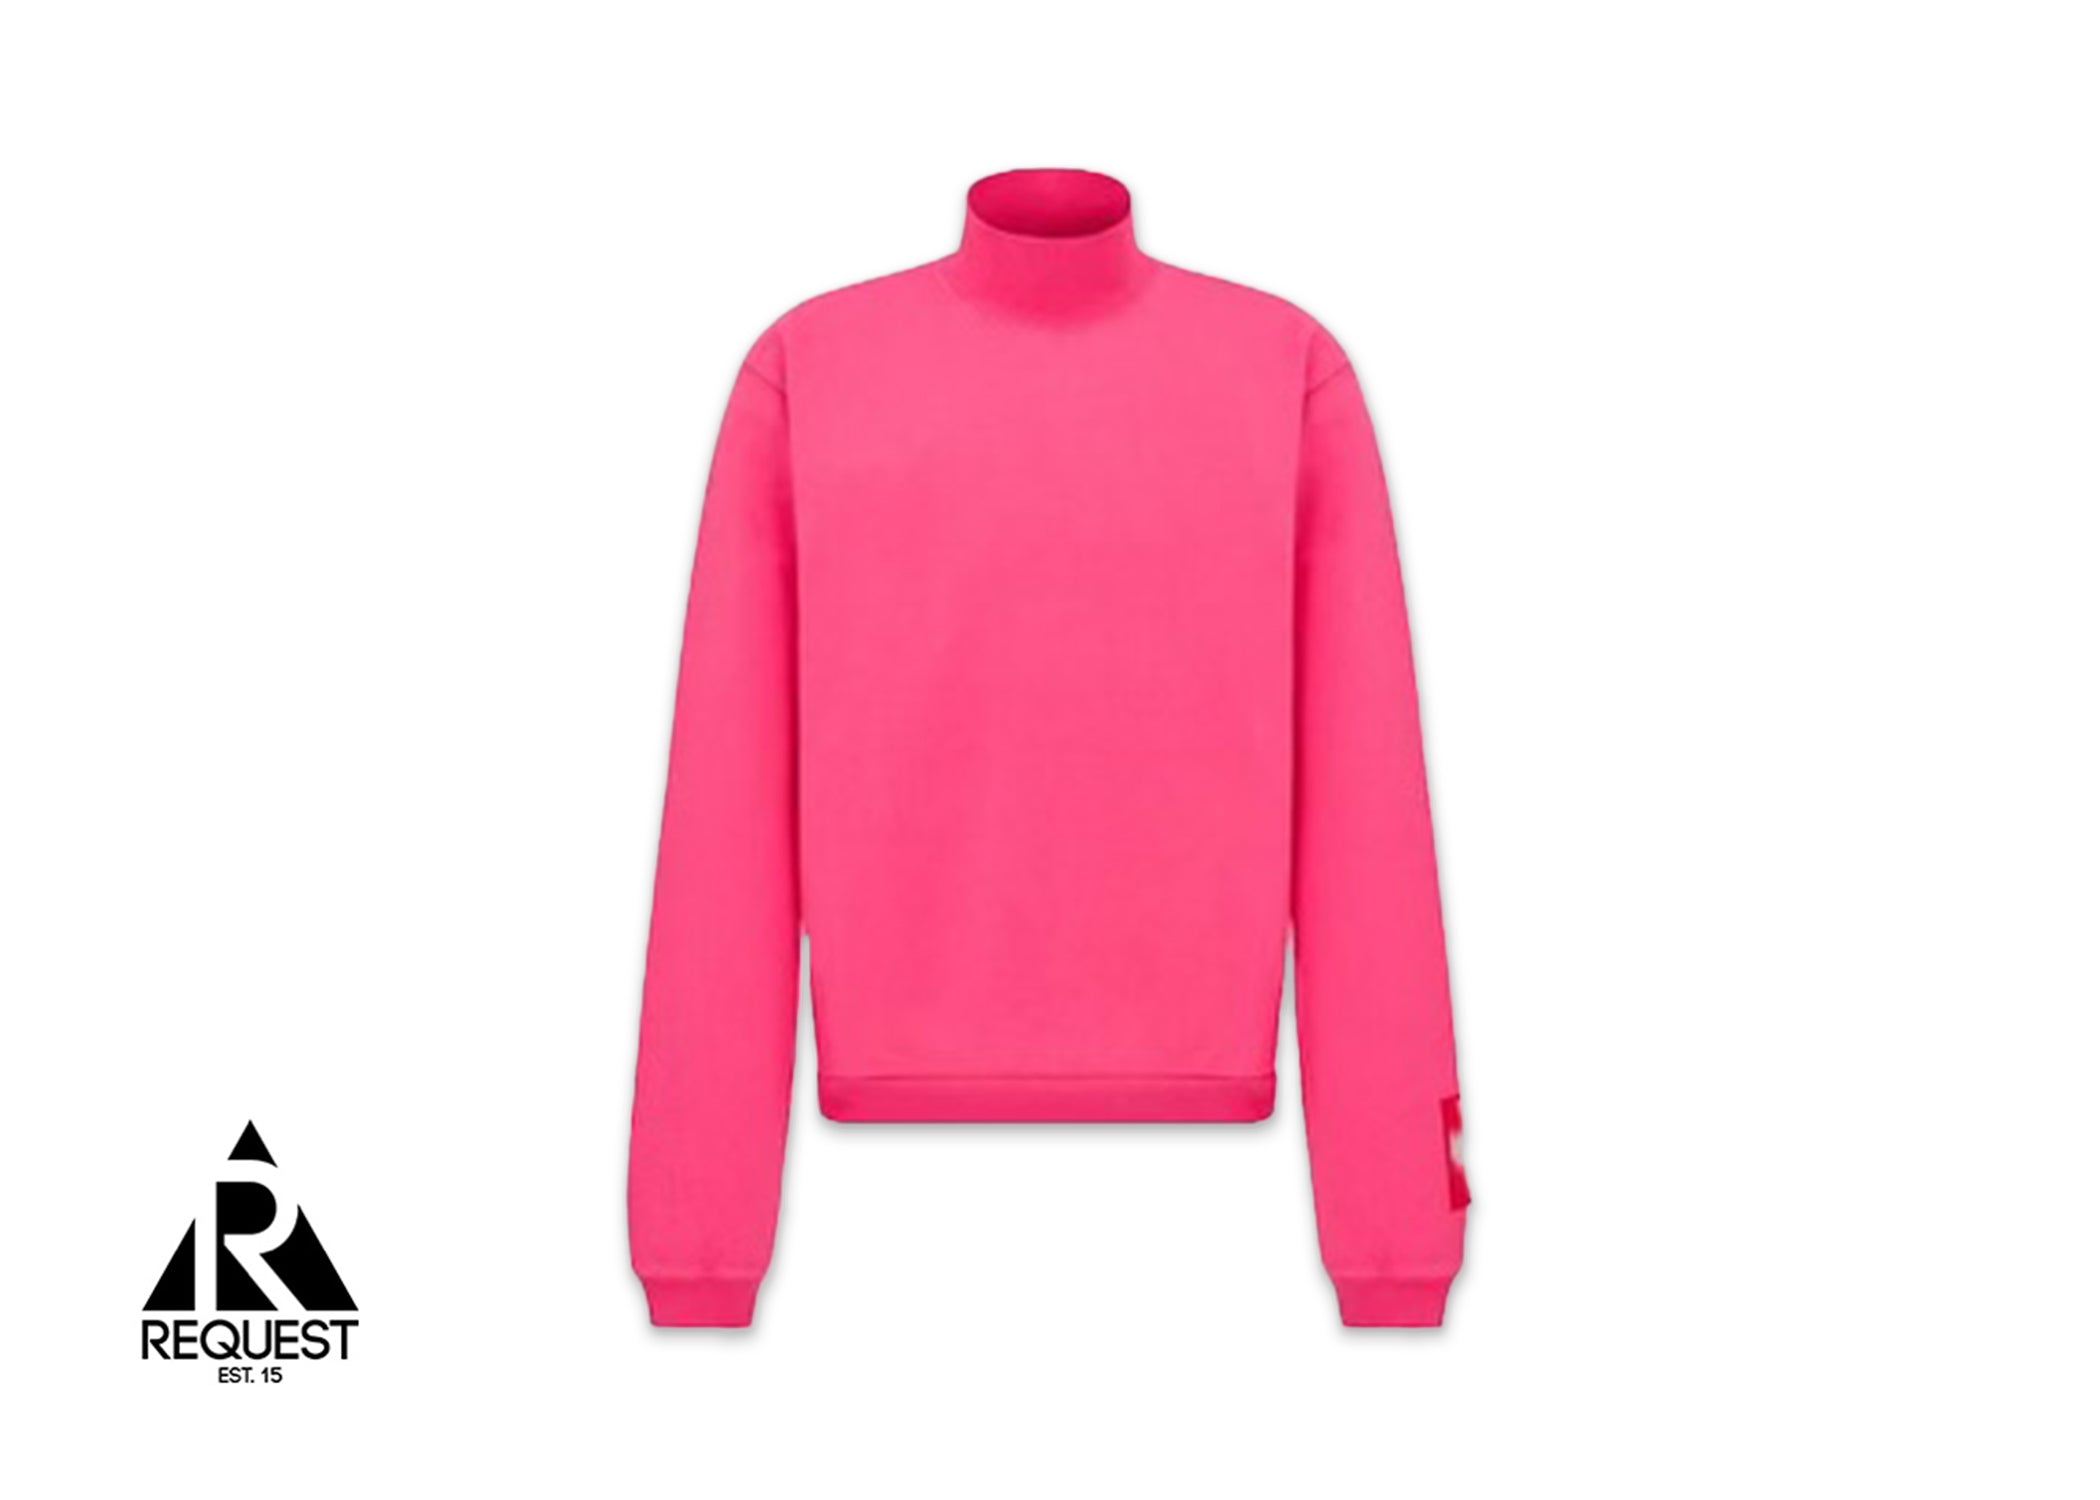 Dior x ERL Relaxed Fit Turtleneck Sweatshirt "Pink"